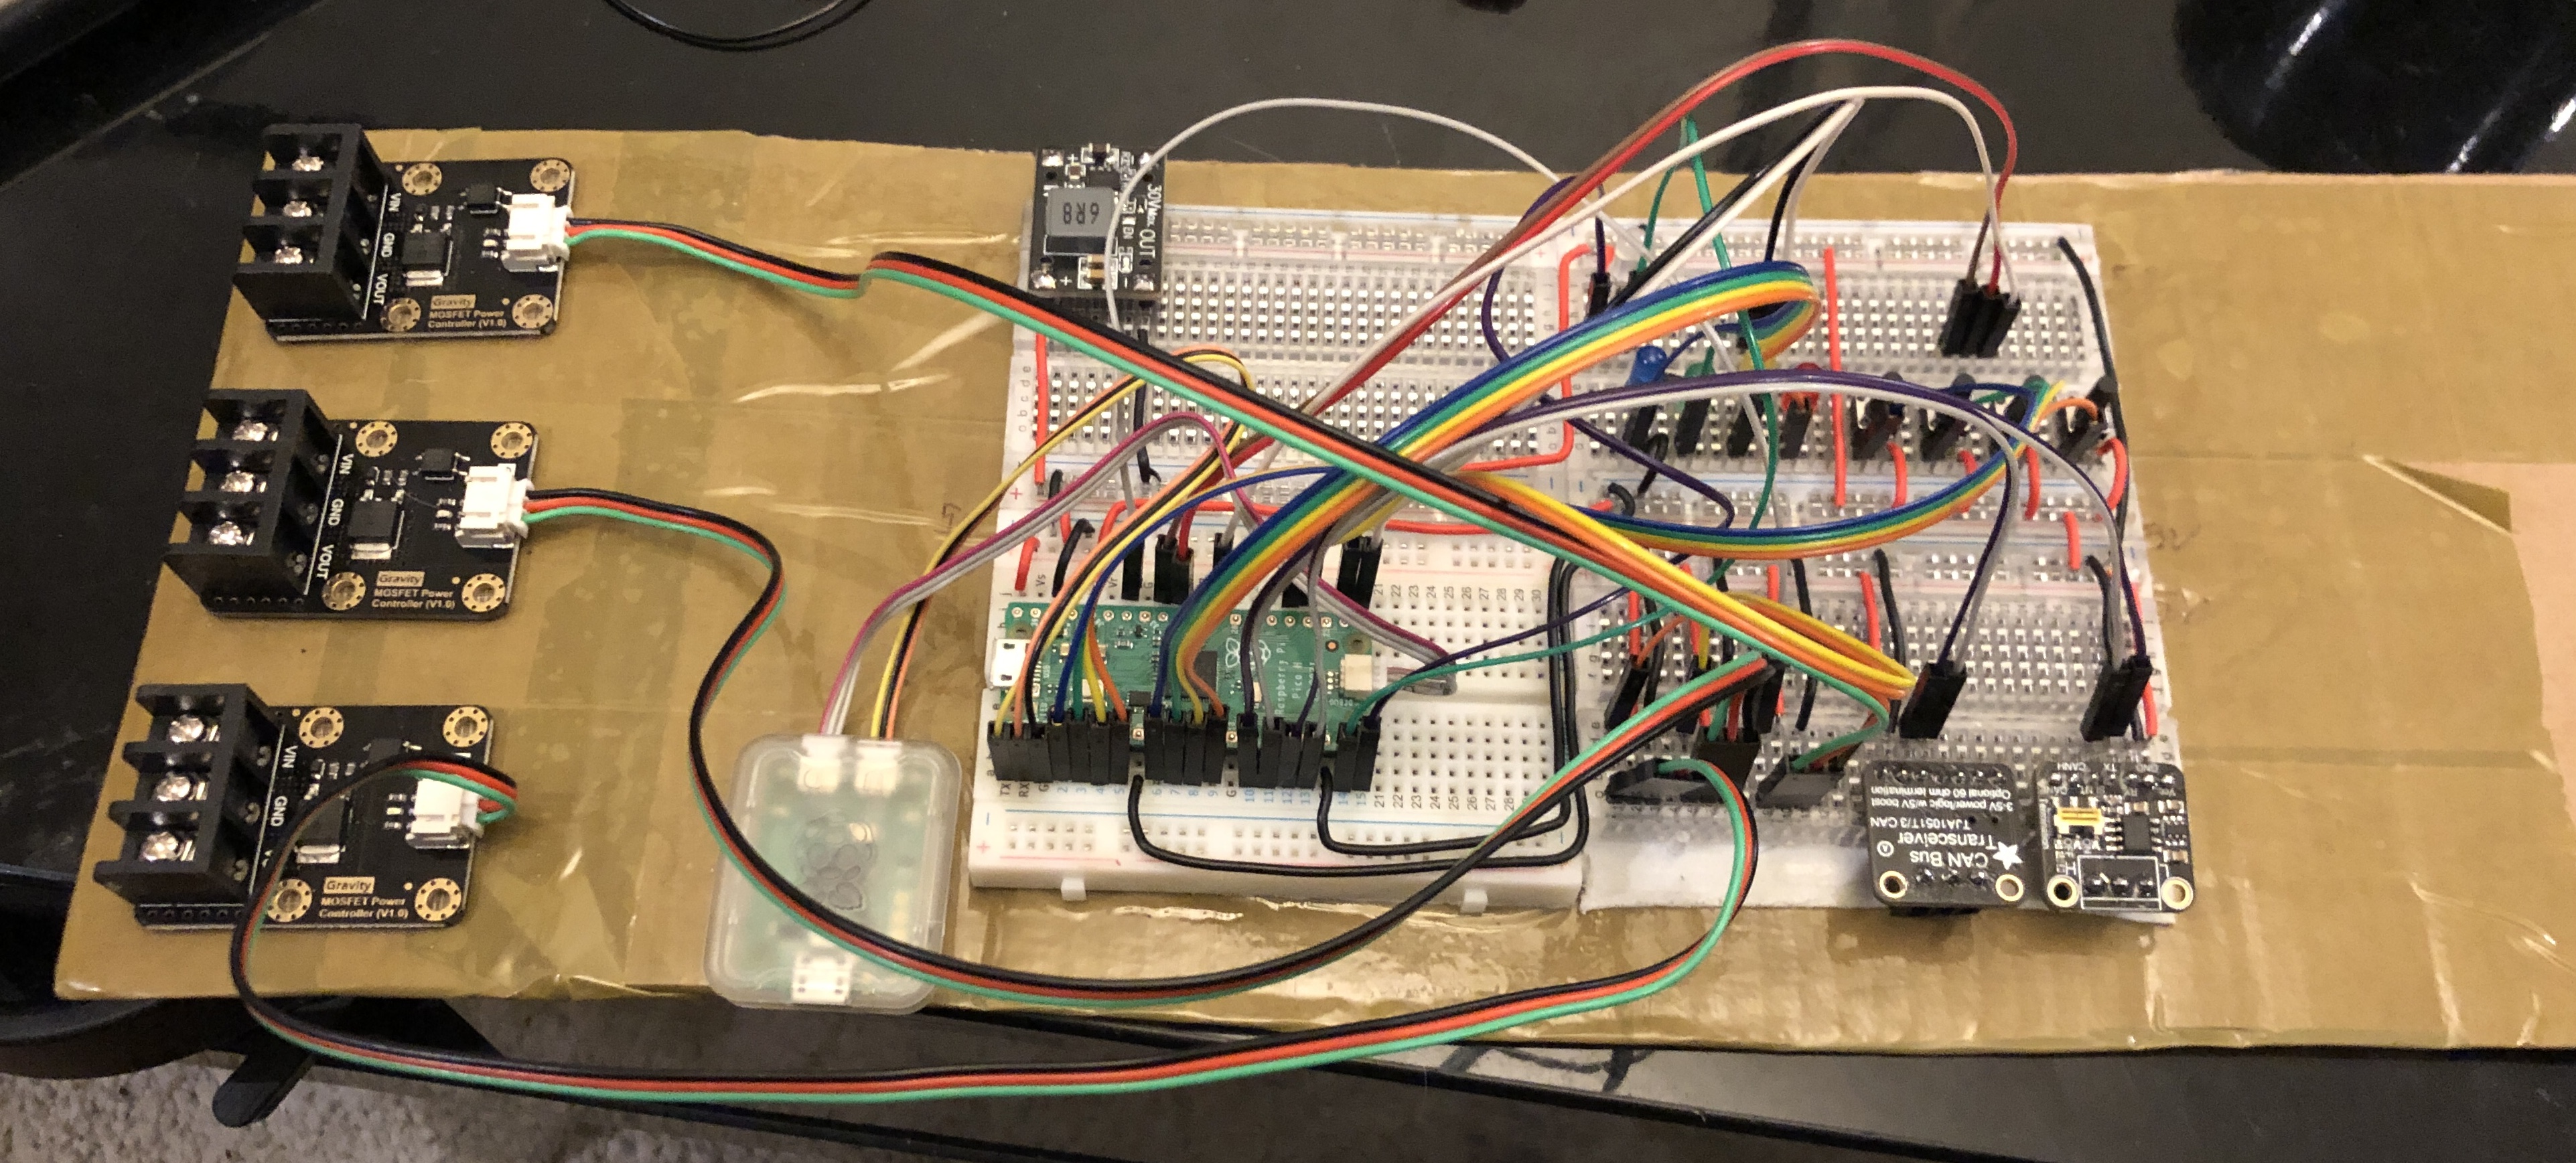 Initial wiring on bread boards